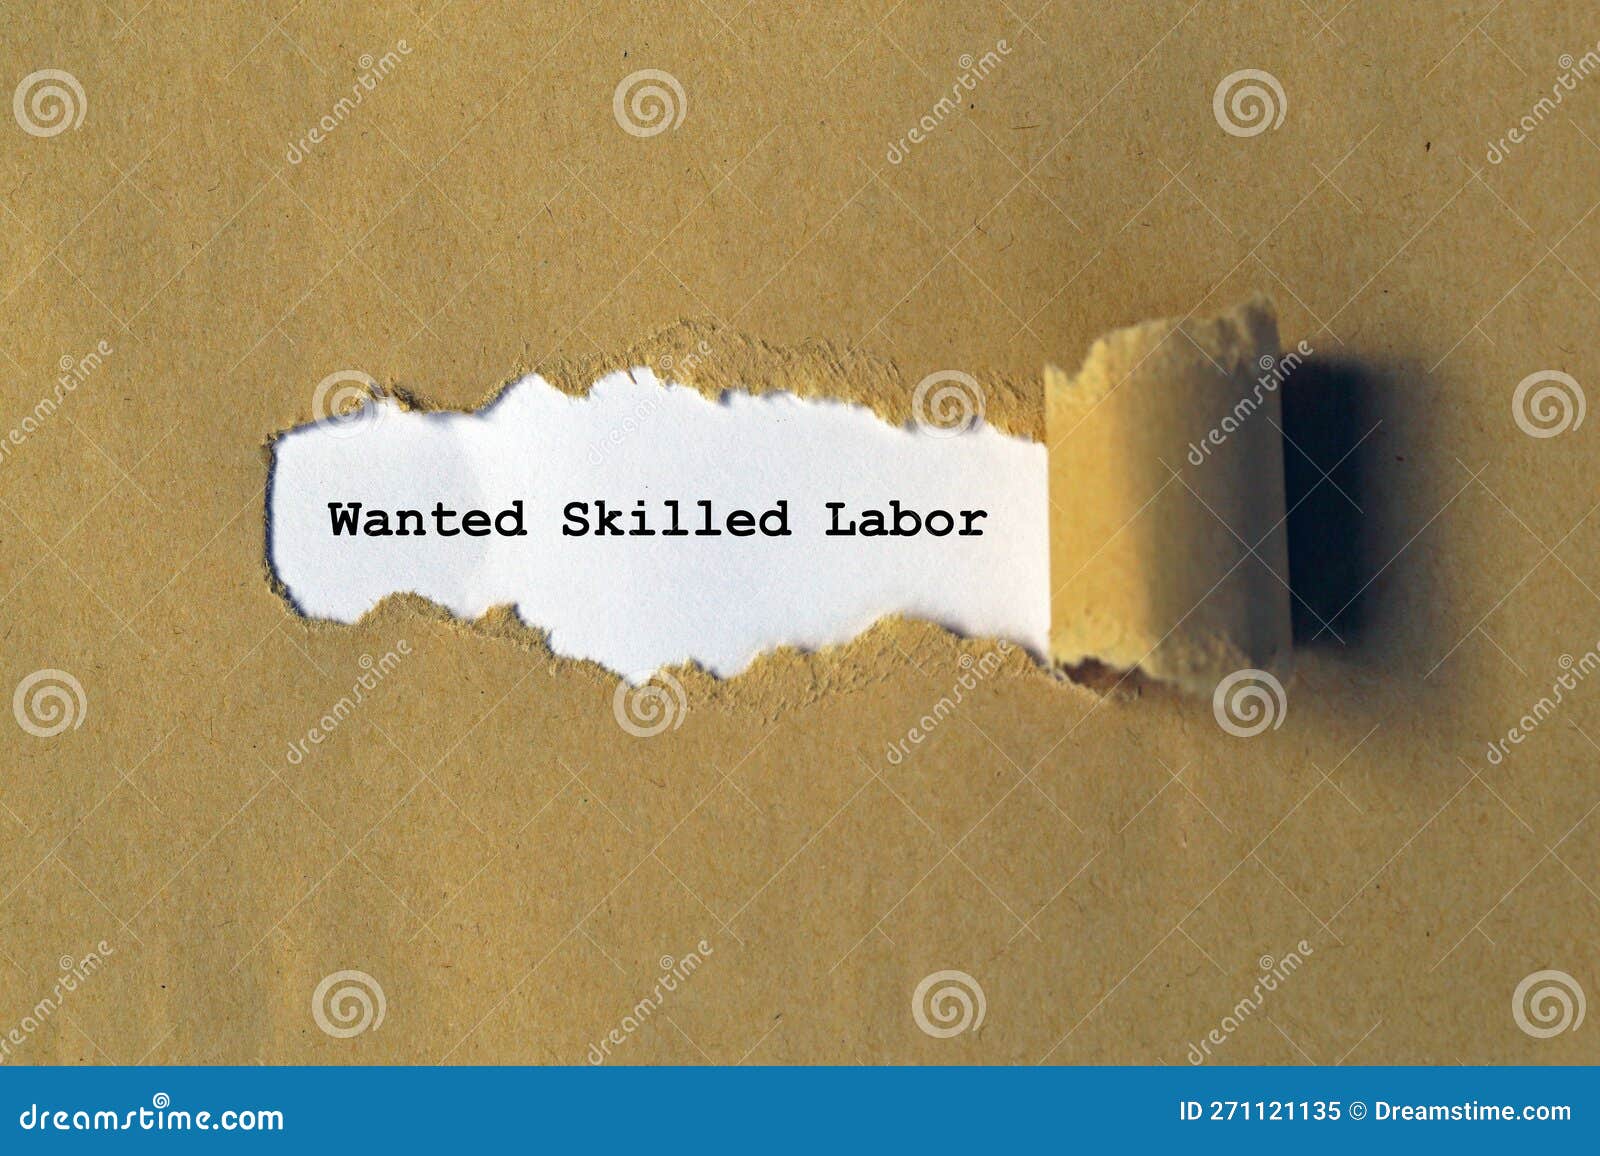 wanted skilled labor on paper